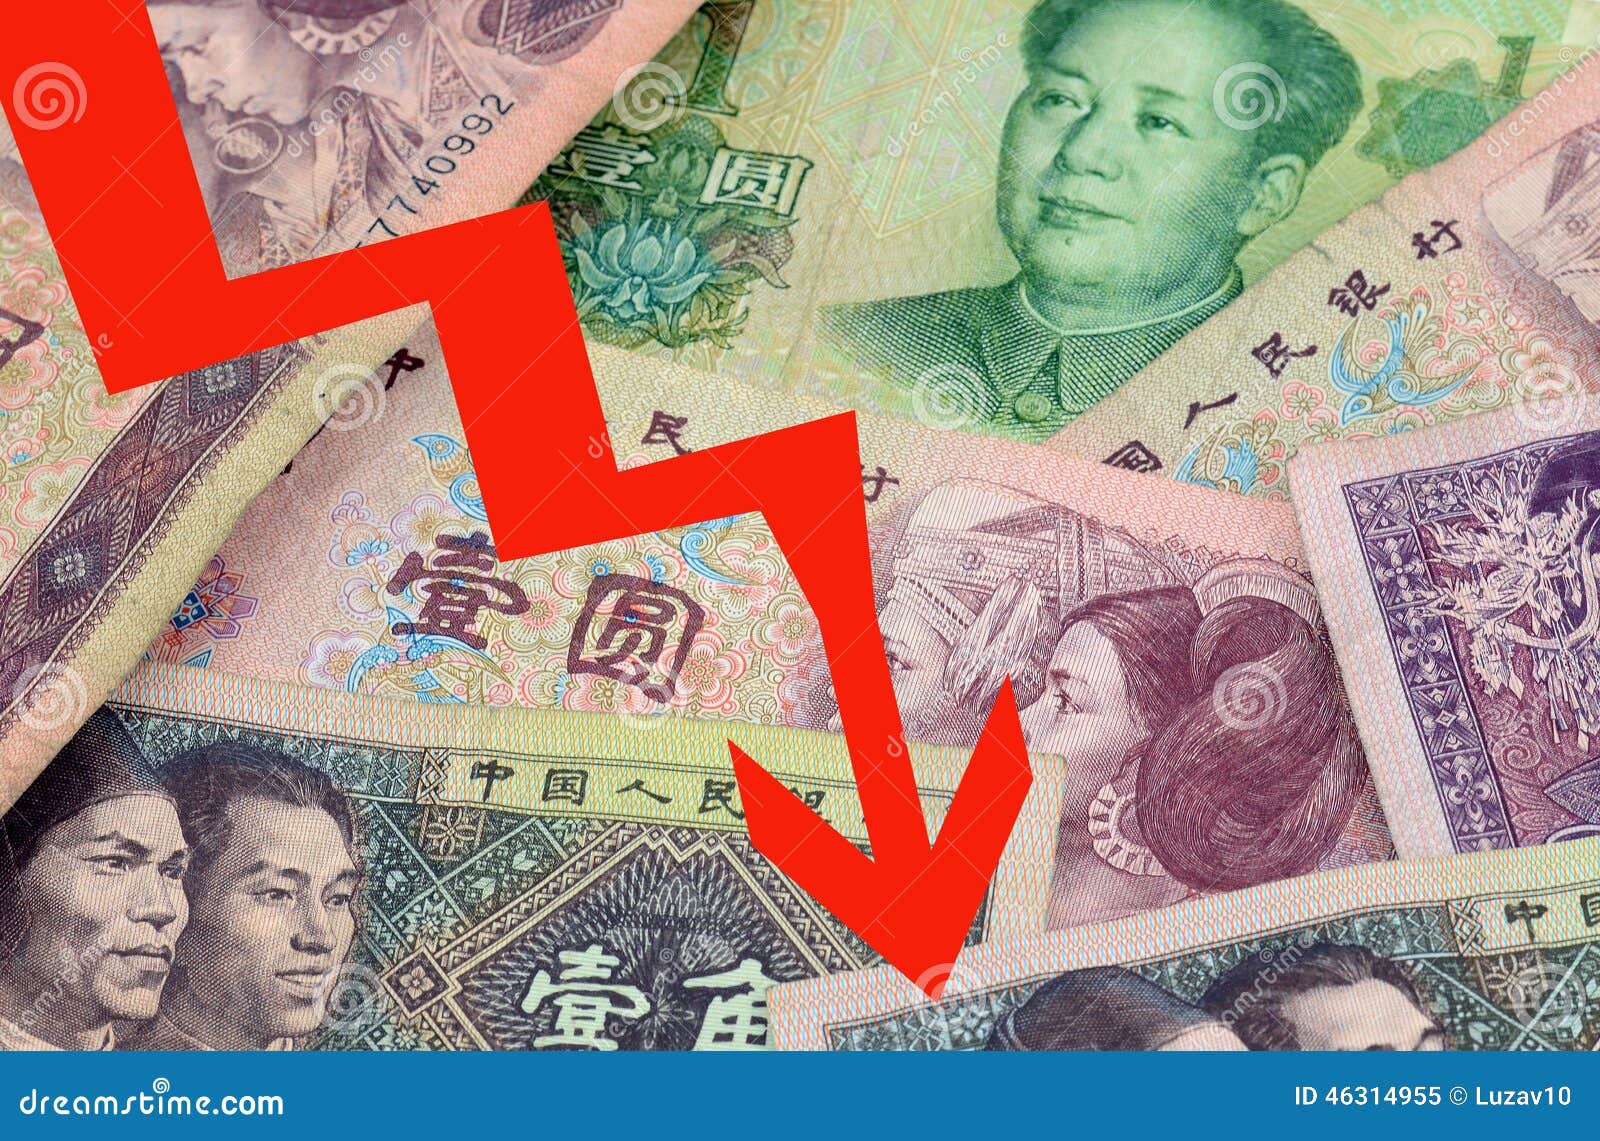 YUAN Chinese Currency FALLING Stock Image - Image of dollars, economy:  46314955